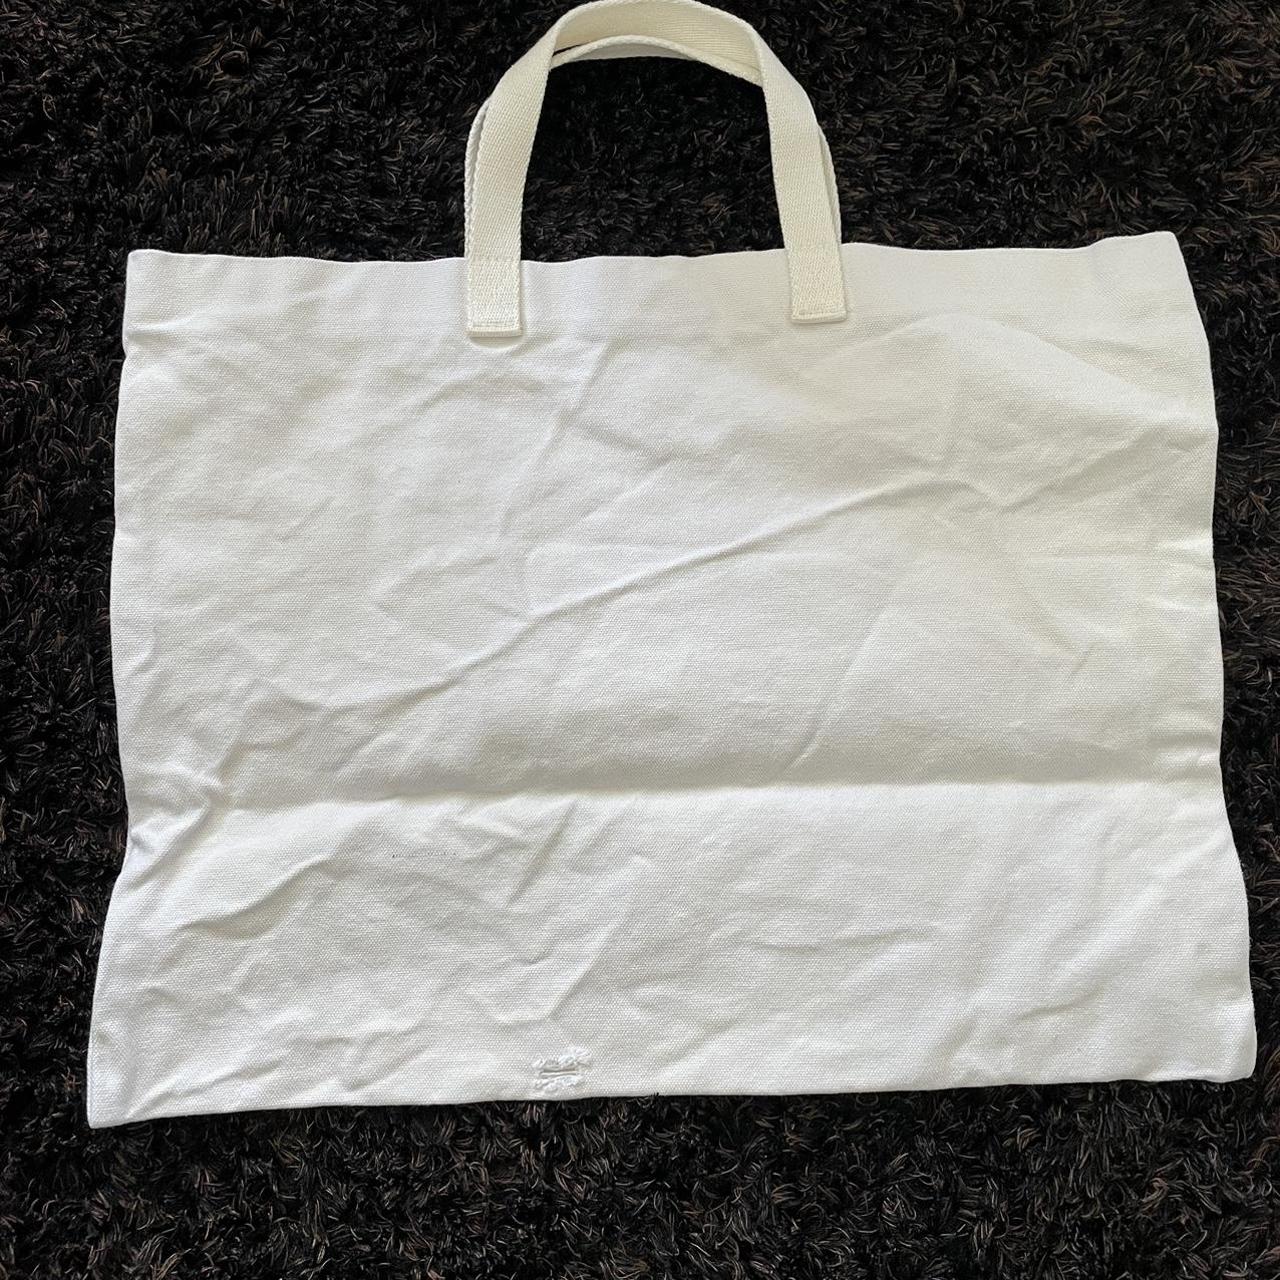 Nike fully functional tote bag! Slightly used but no - Depop